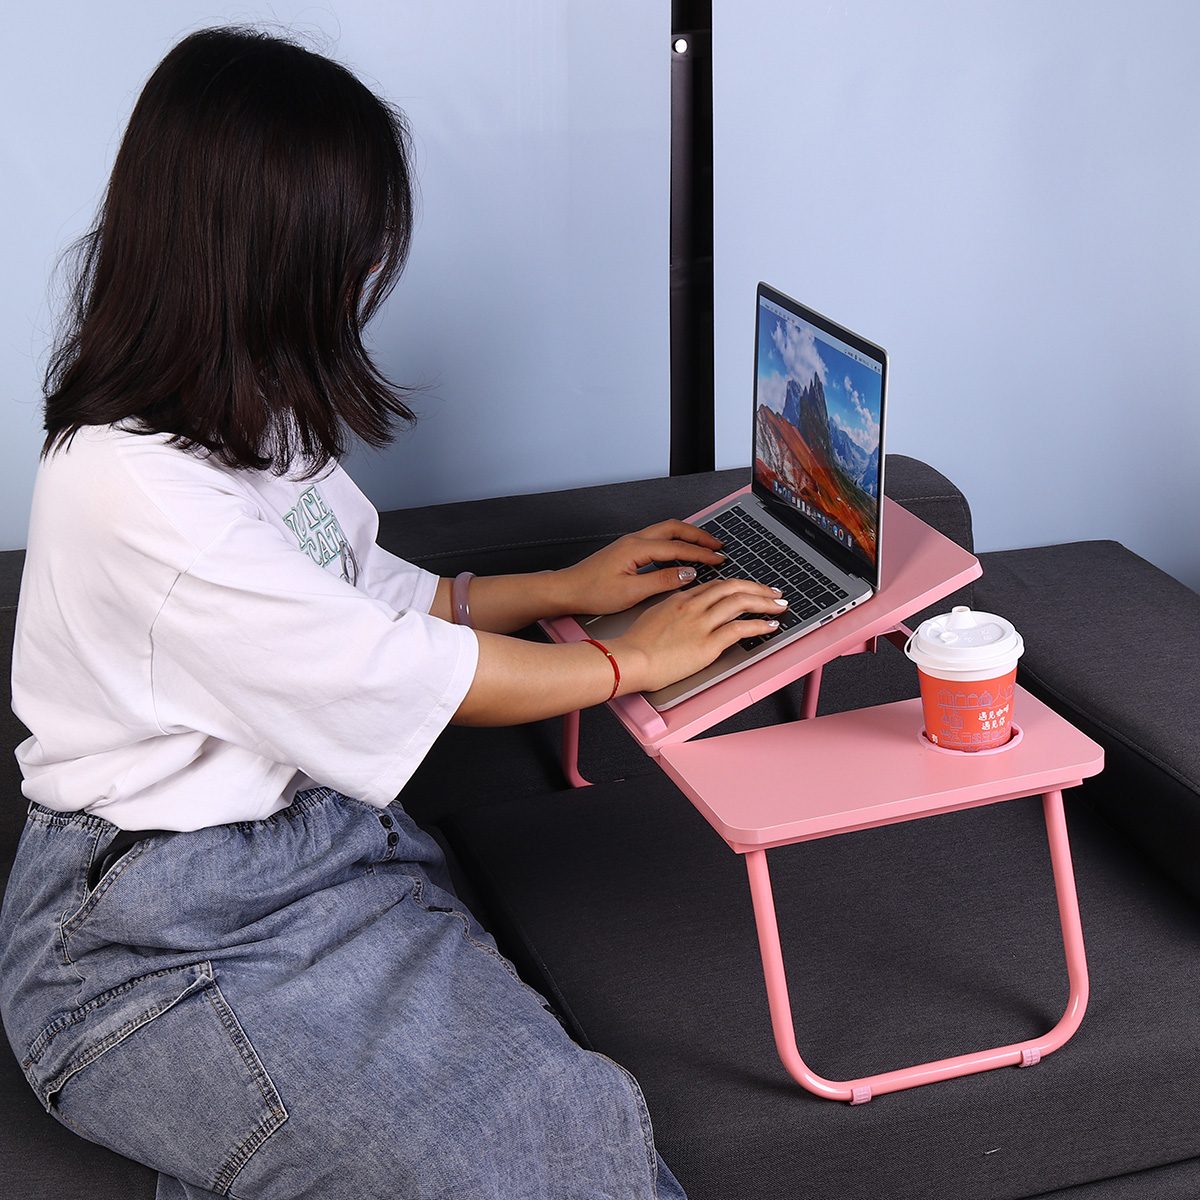 Liftable-Folding-Computer-Desk-Laptop-Stand-4-Heights-Adjustable-with-Cup-Holder-Lap-Bed-Table-Tray--1783876-10